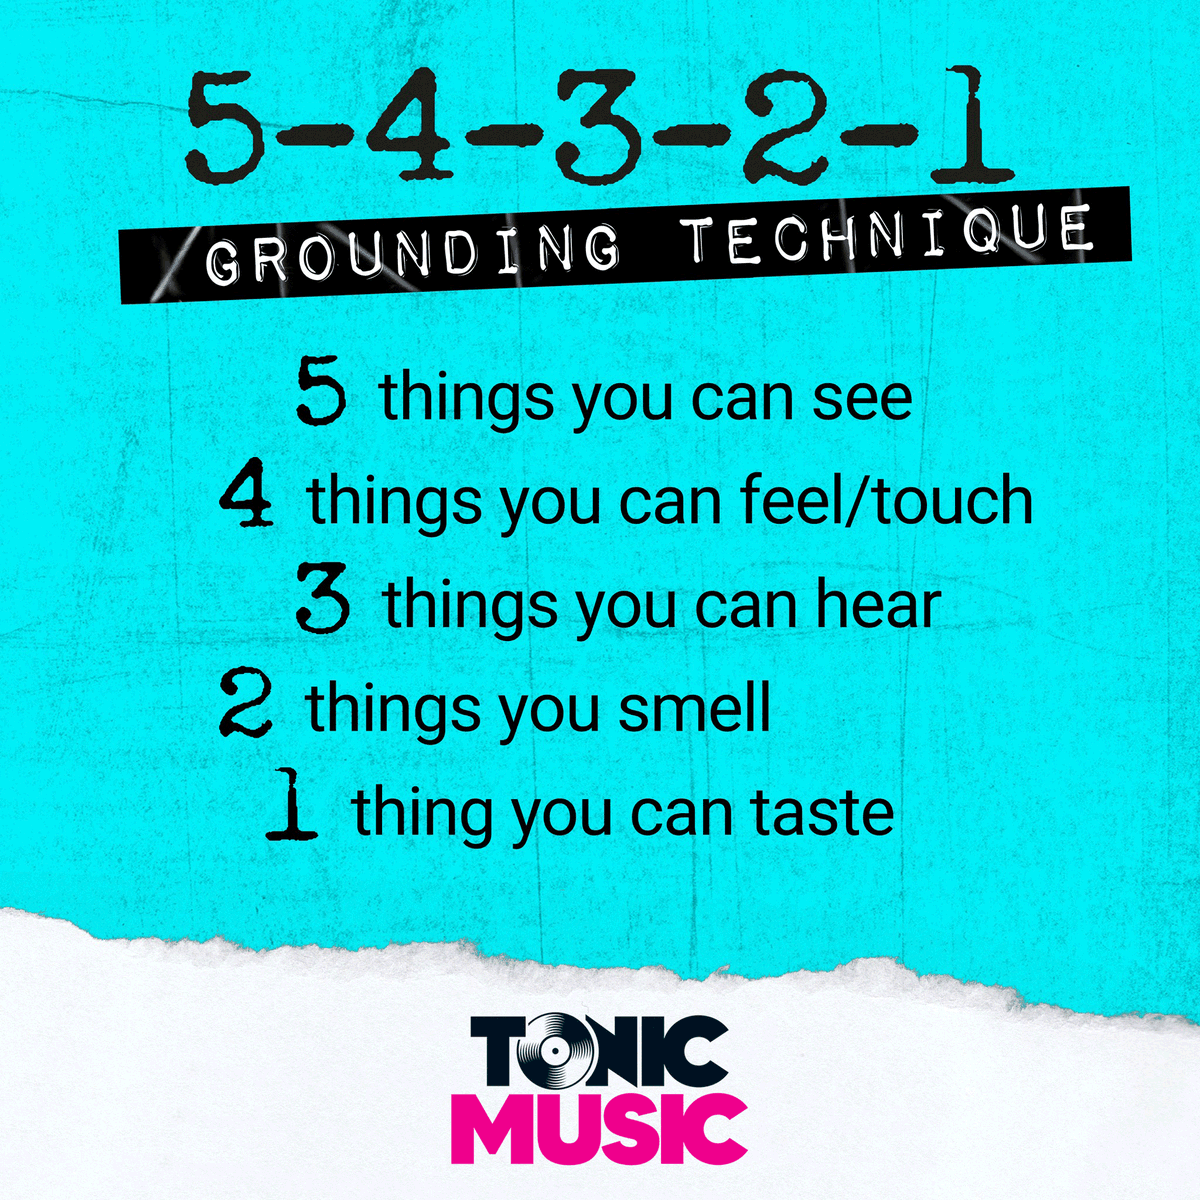 Grounding techniques help reconnect you back to the present moment when you’re feeling overwhelmed.
Give this one a go. Take a breath, stop and observe.

#MentalHealth #Music #Tonic
#TonicRider #NeverMindTheStigma